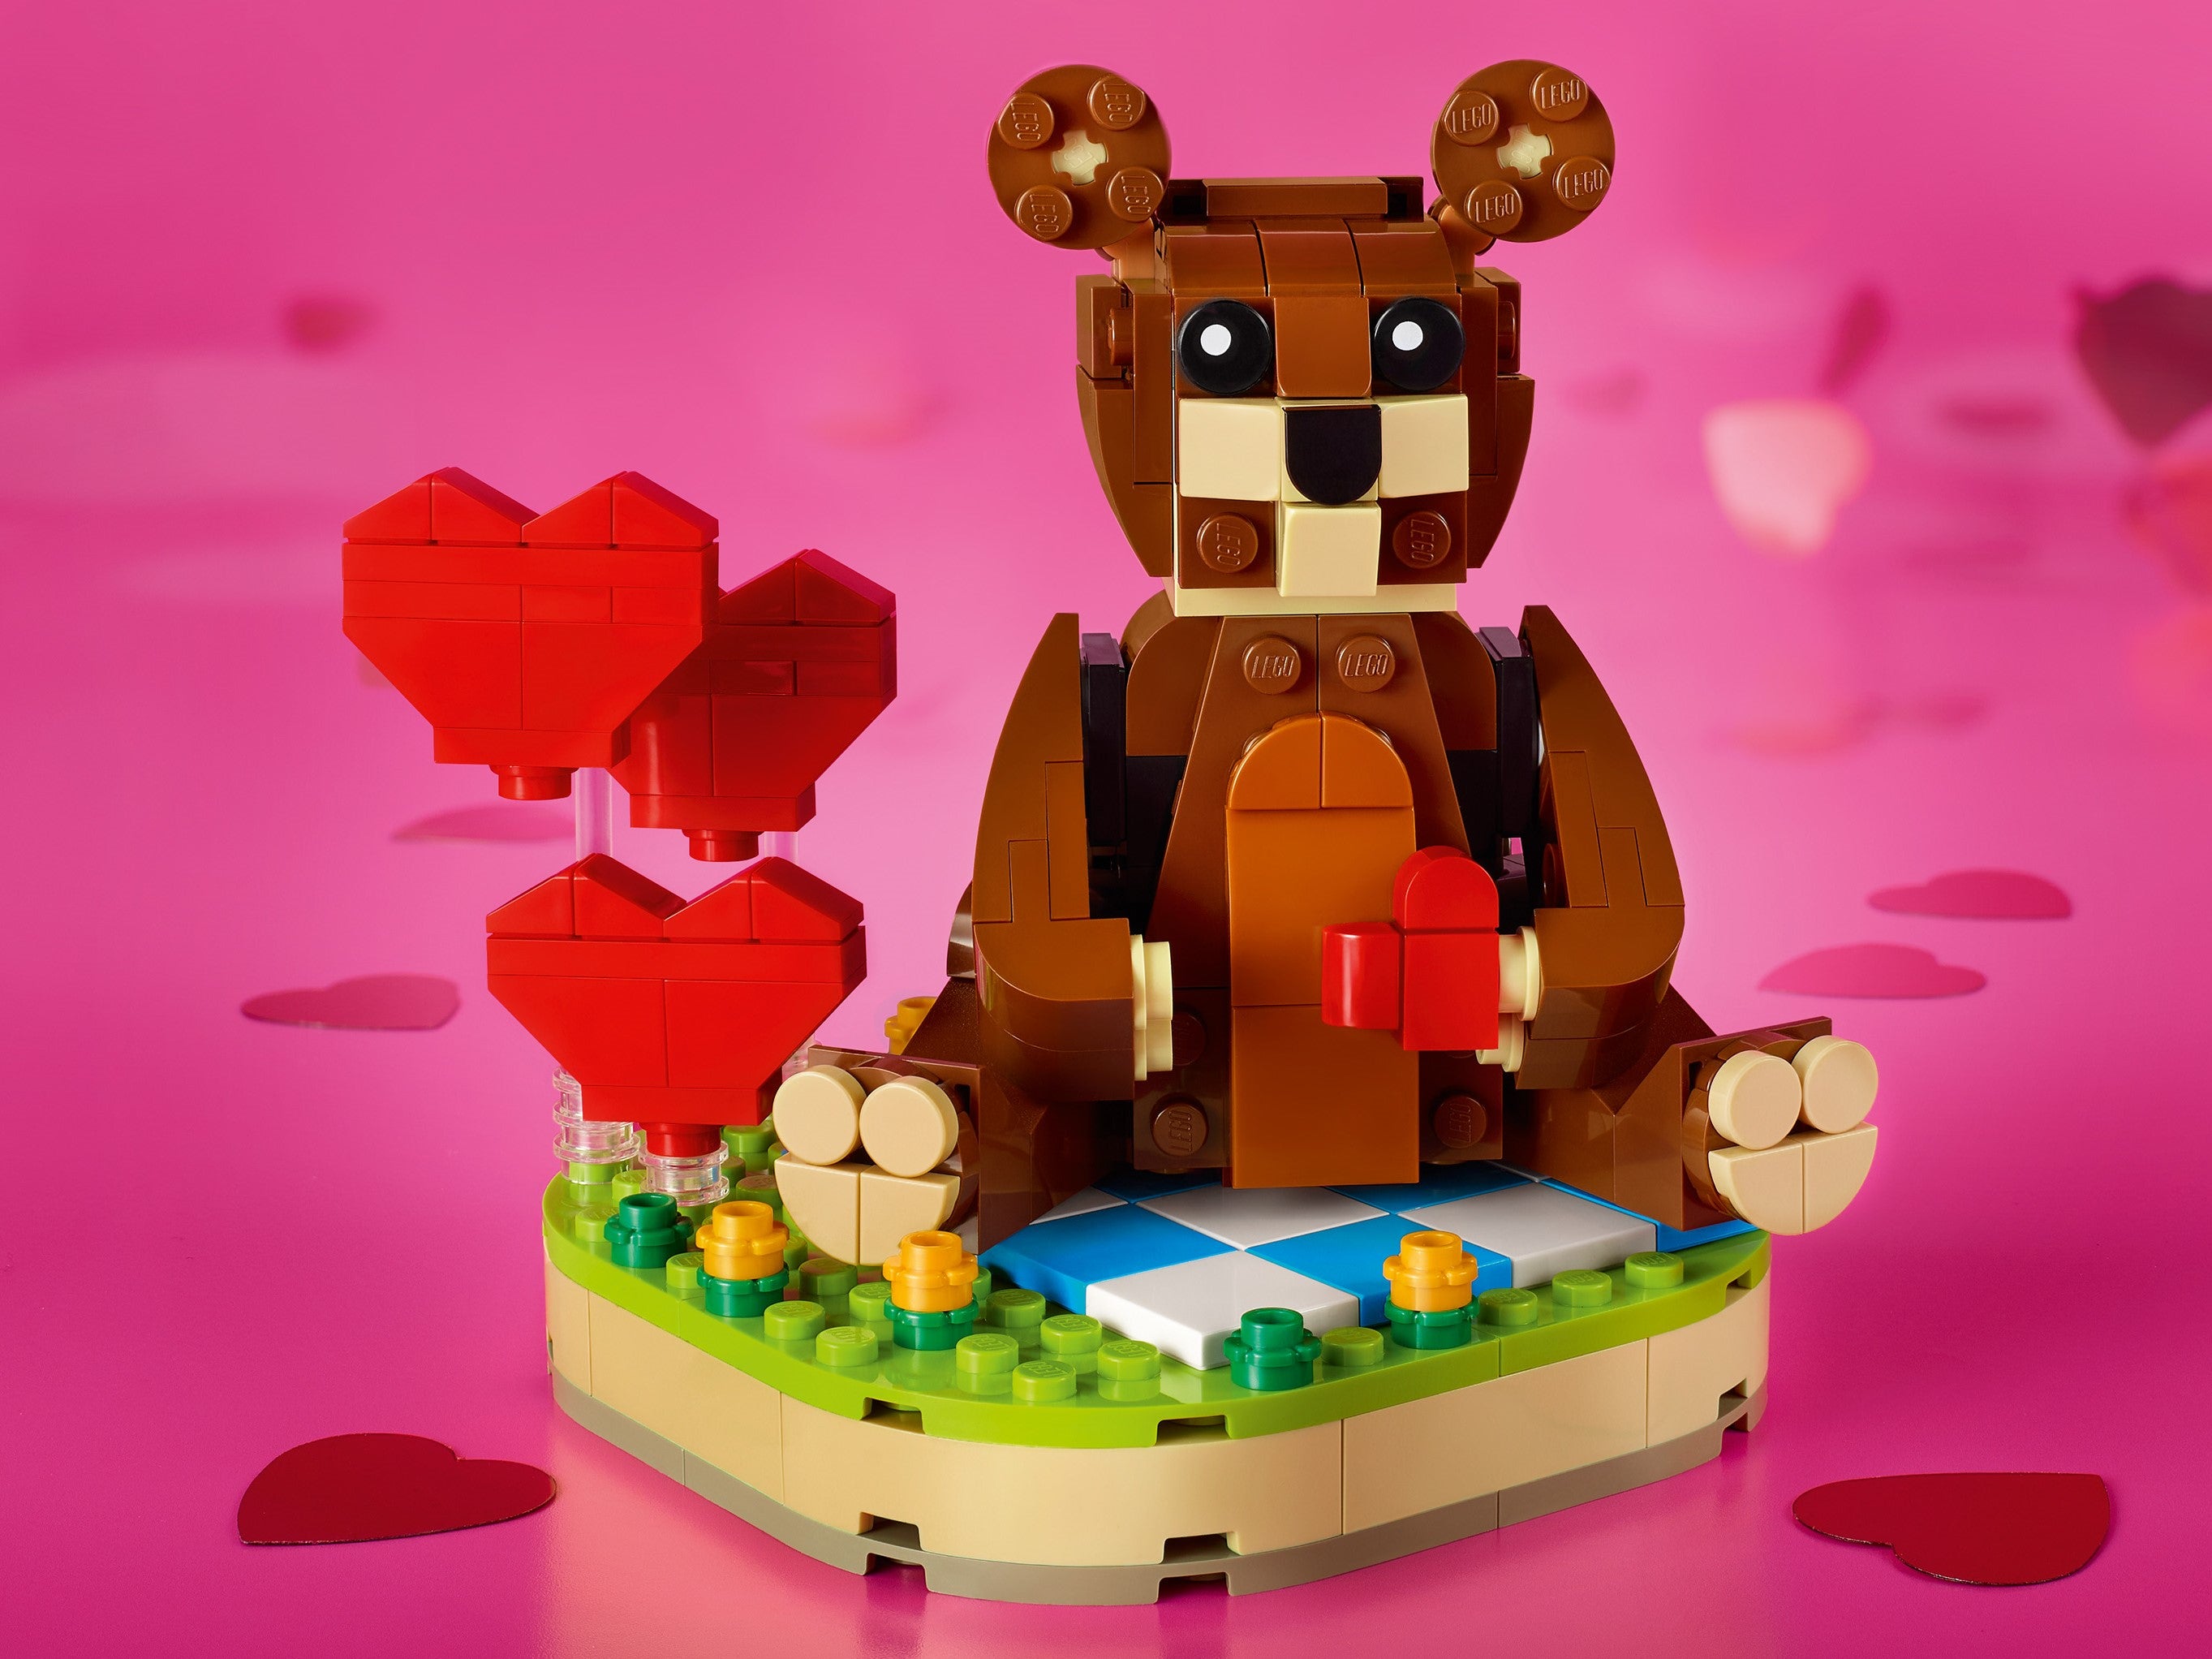 LEGO Valentine's Brown Bear 40462 Brand New and Sealed Galentines Gift